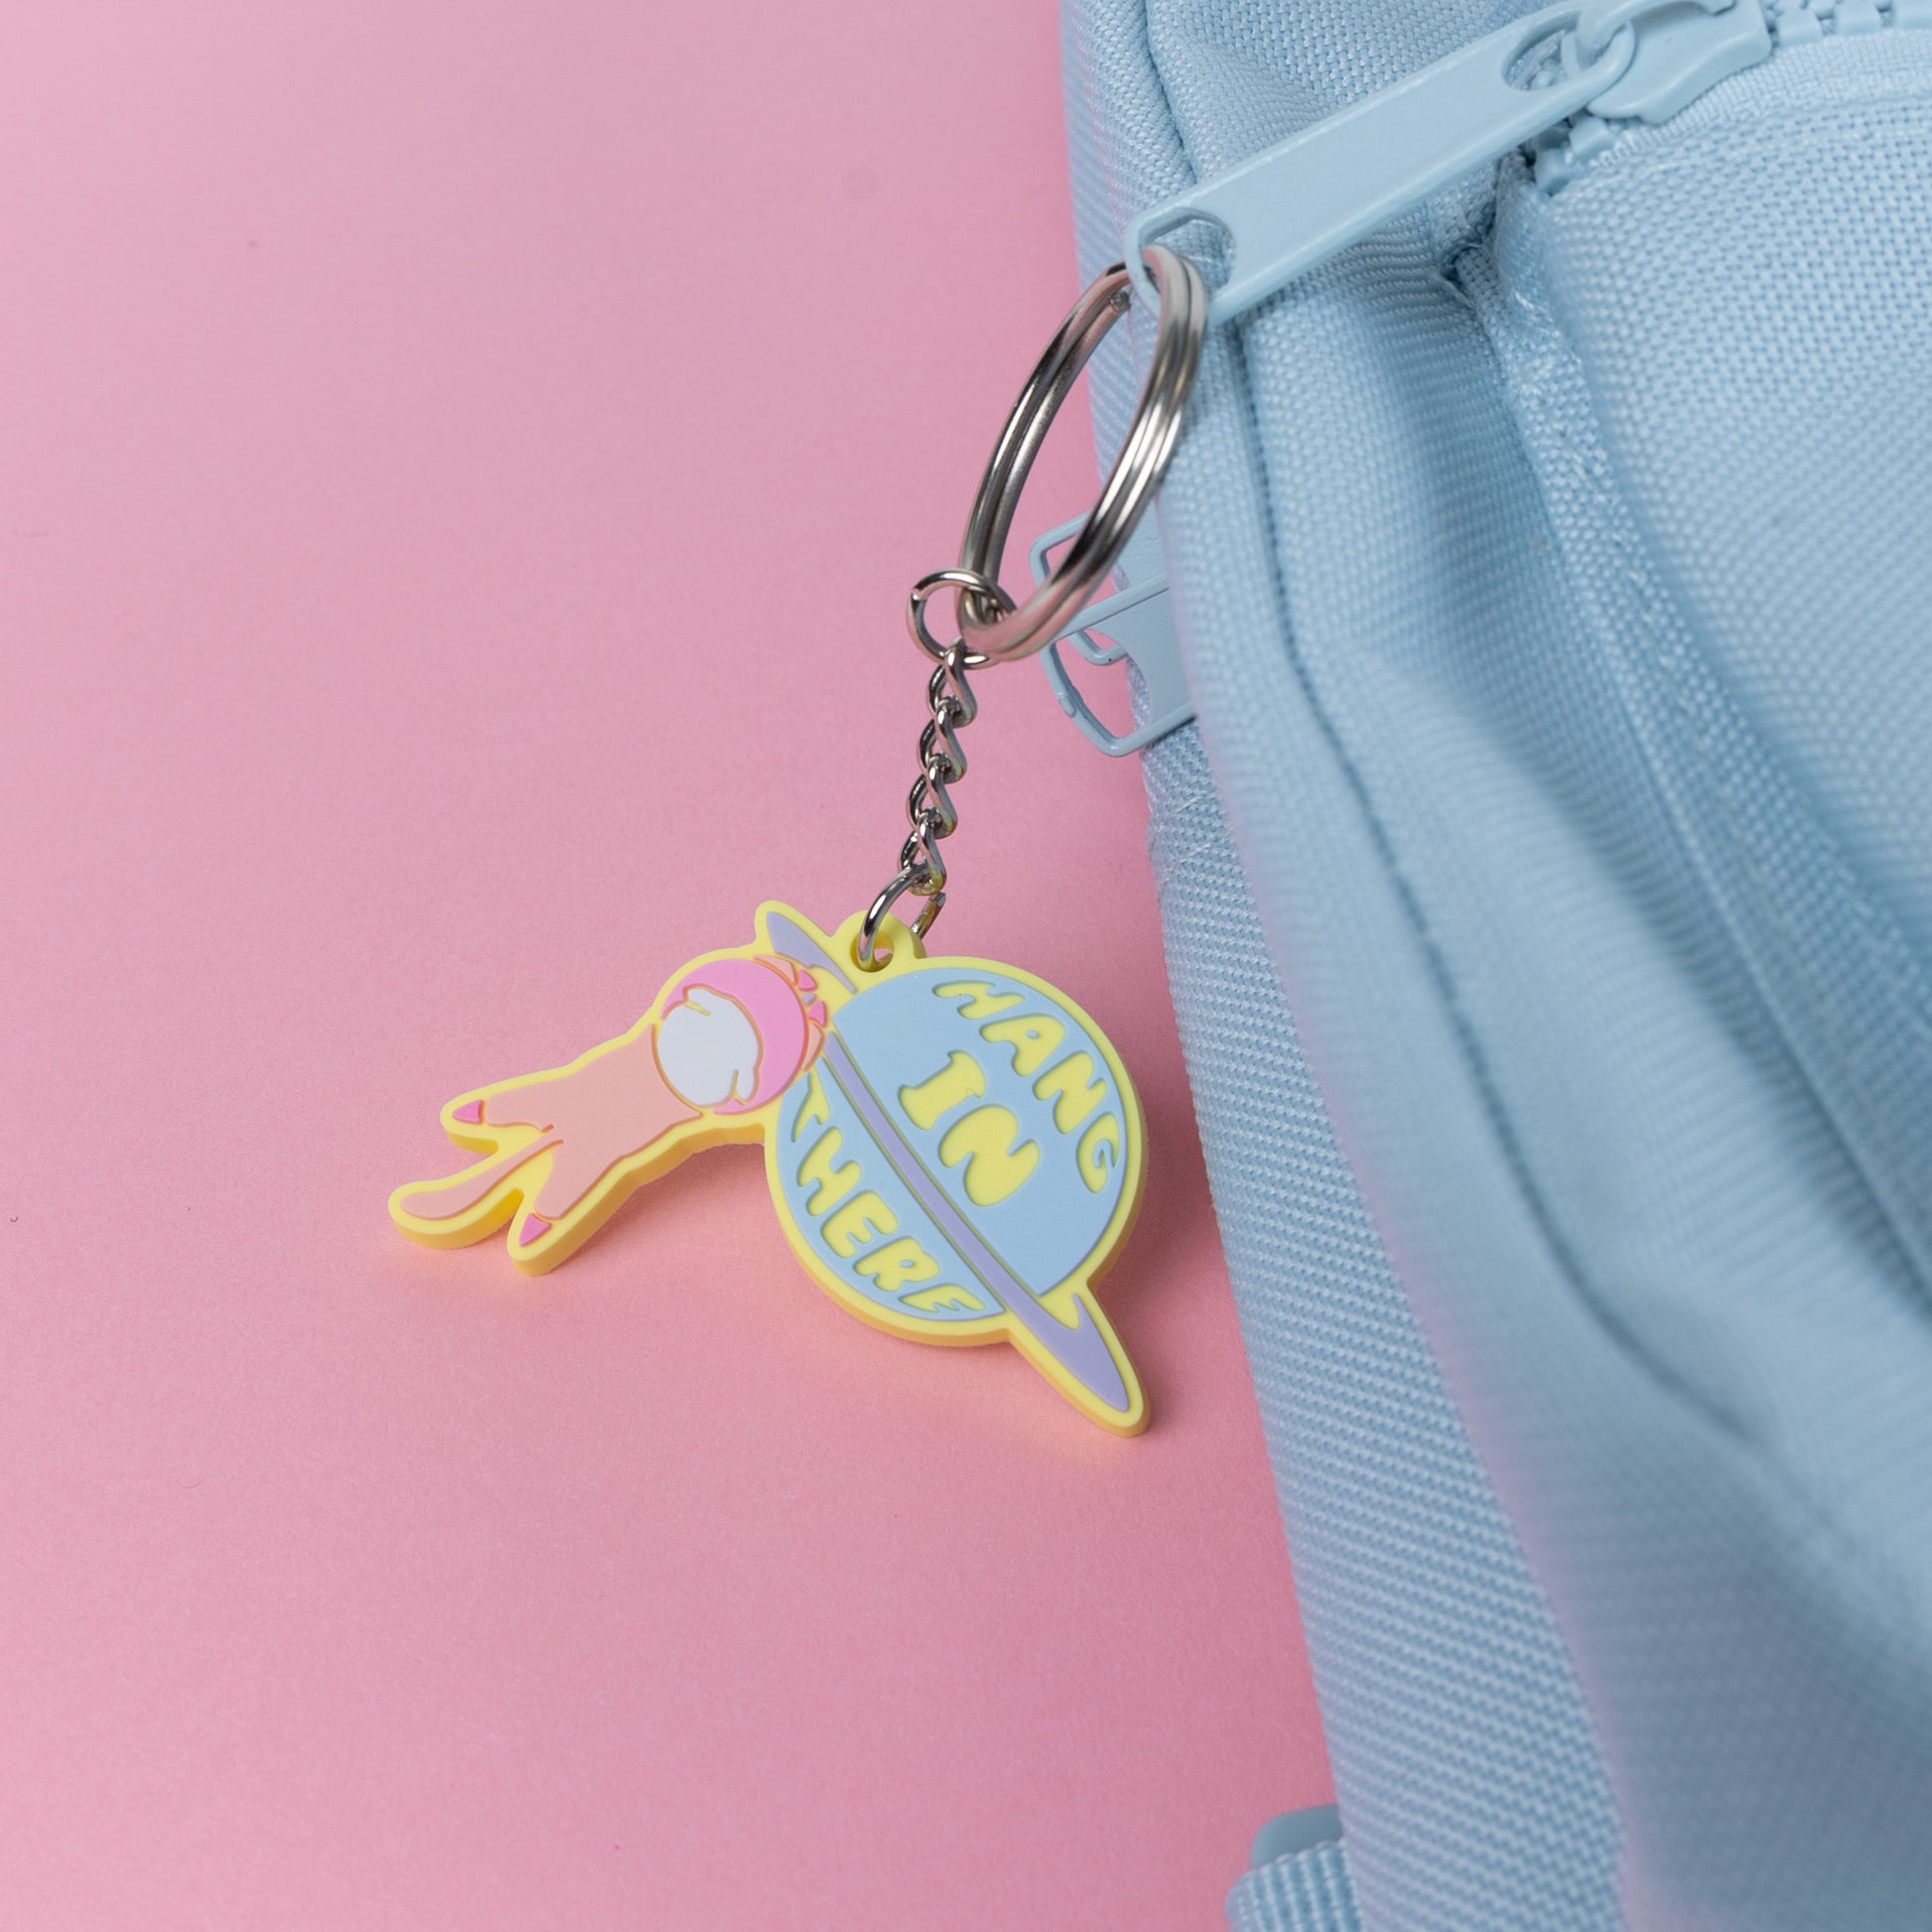 Photograph of Cute Cat Astronaut (Catstronaut) PVC Keychain, hanging onto a planet with cute phrase 'Hang In There'; attached to a rucksack.